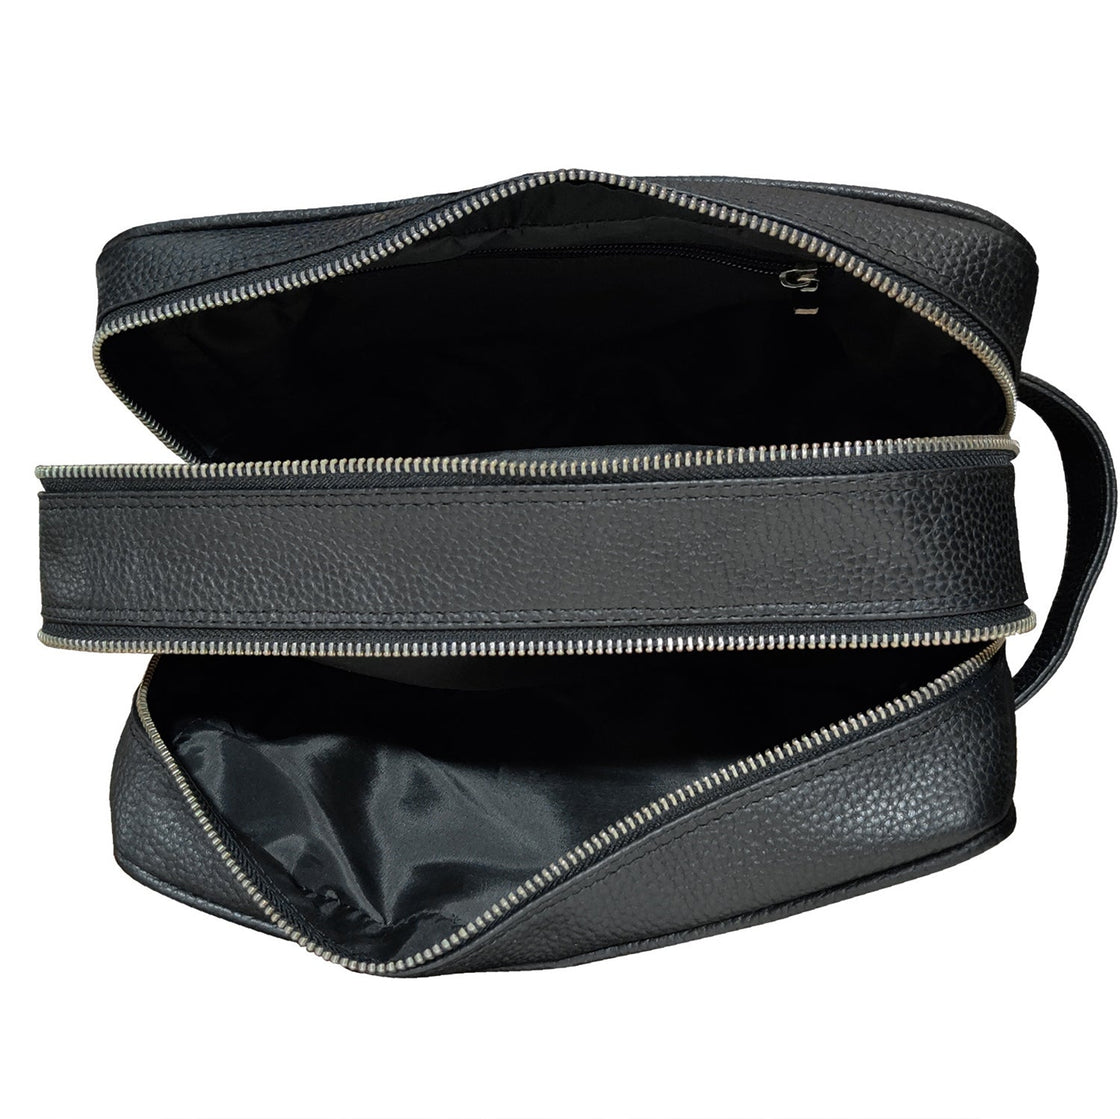 Johnny Leather Travel Toiletry Bag (Black)